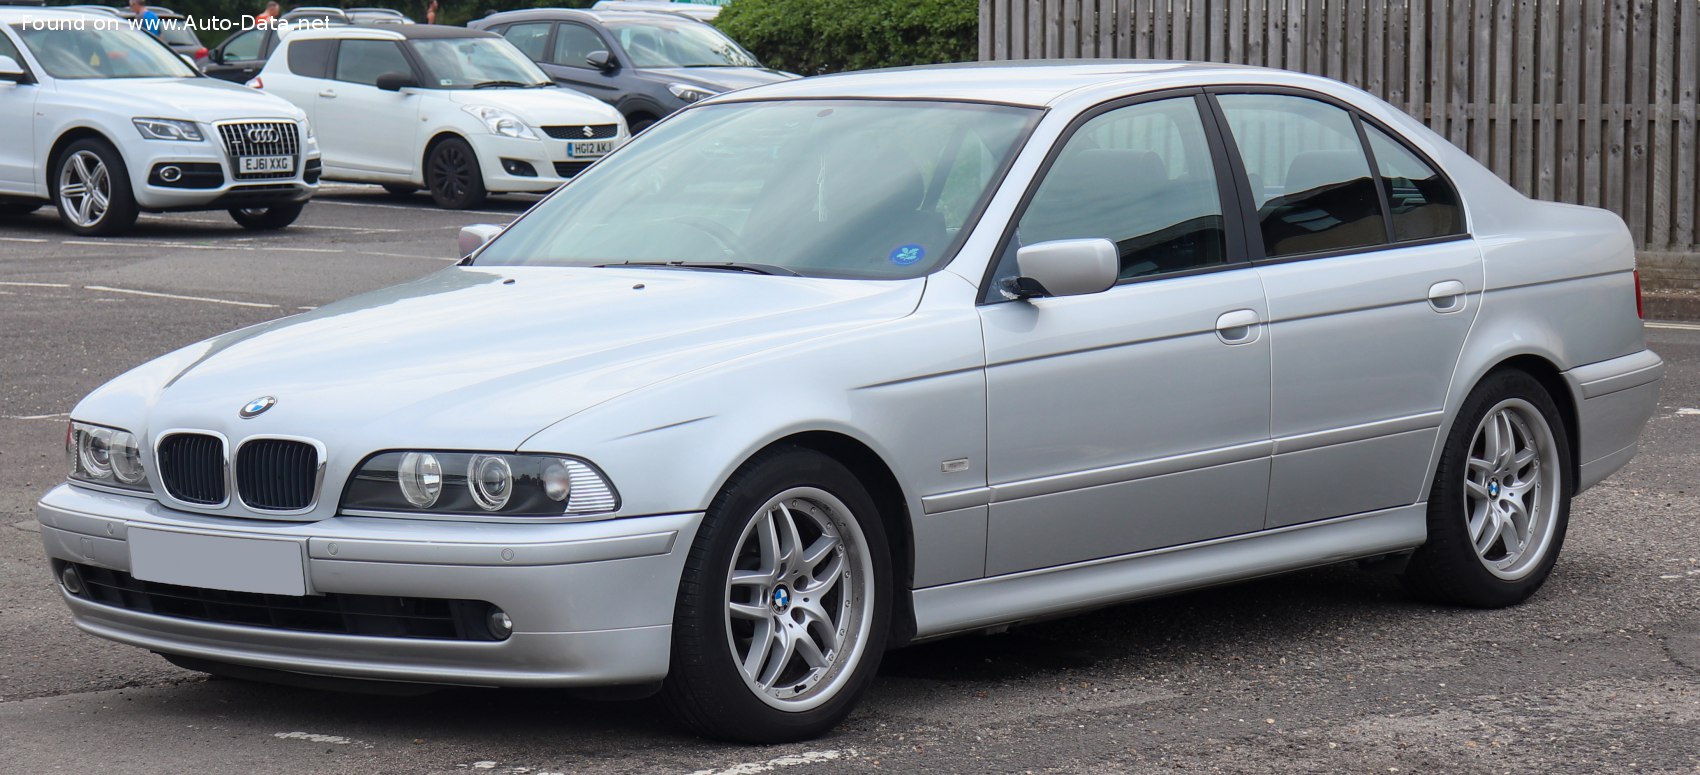 Scharnier paars camouflage 2000 BMW 5 Series (E39, Facelift 2000) 525i 24V (192 Hp) | Technical specs,  data, fuel consumption, Dimensions